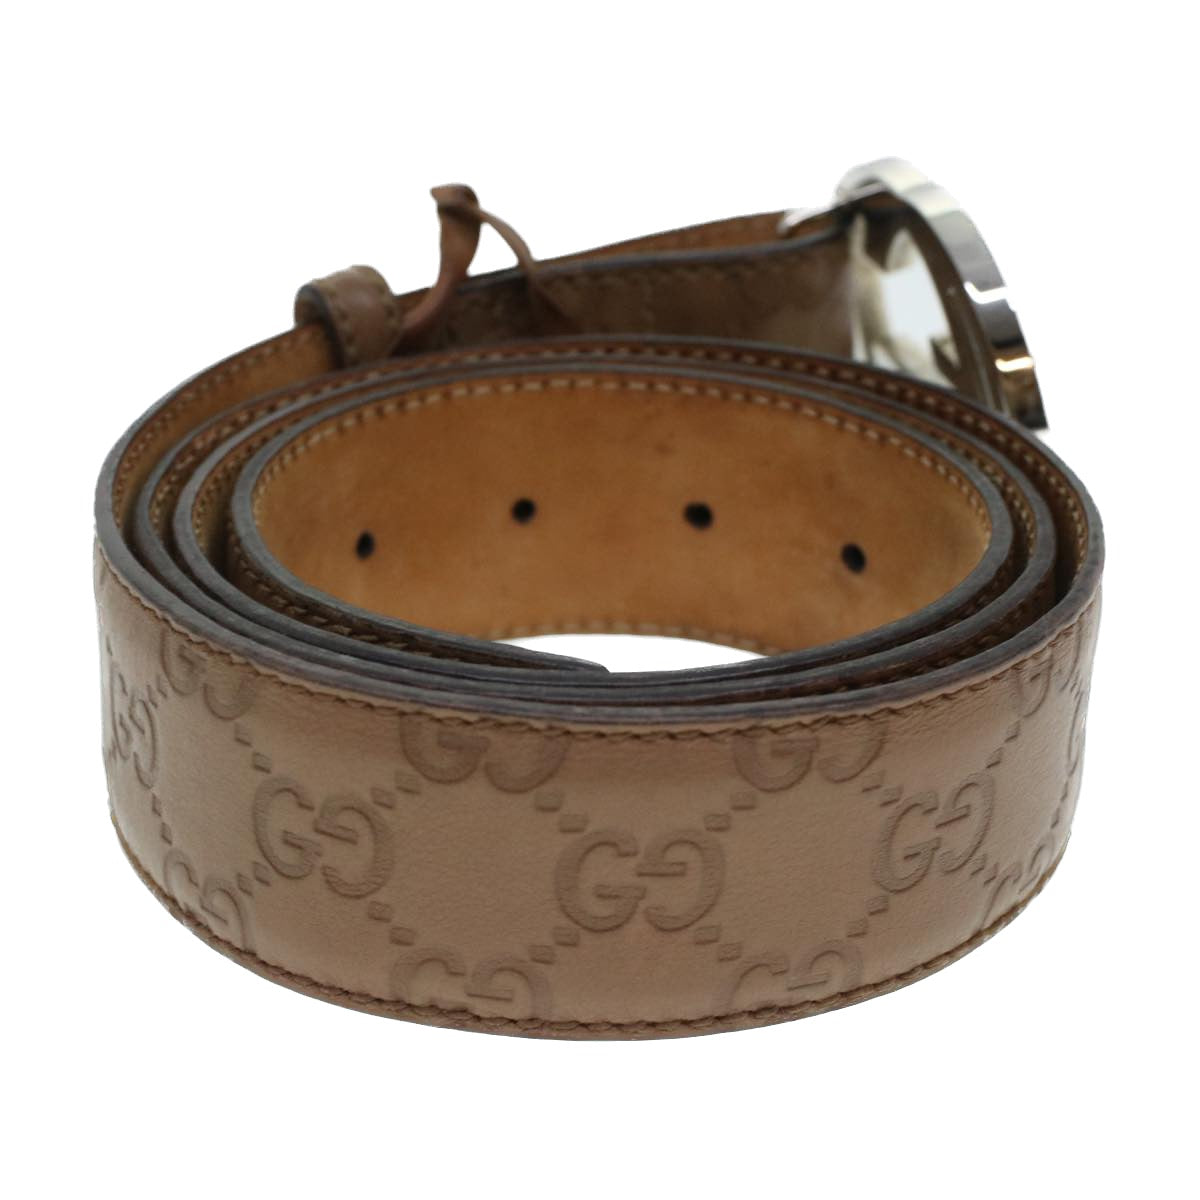 GUCCI GG Canvas Belt Leather 36.2""-43.3"" Brown 114984 Auth hk727 - 0